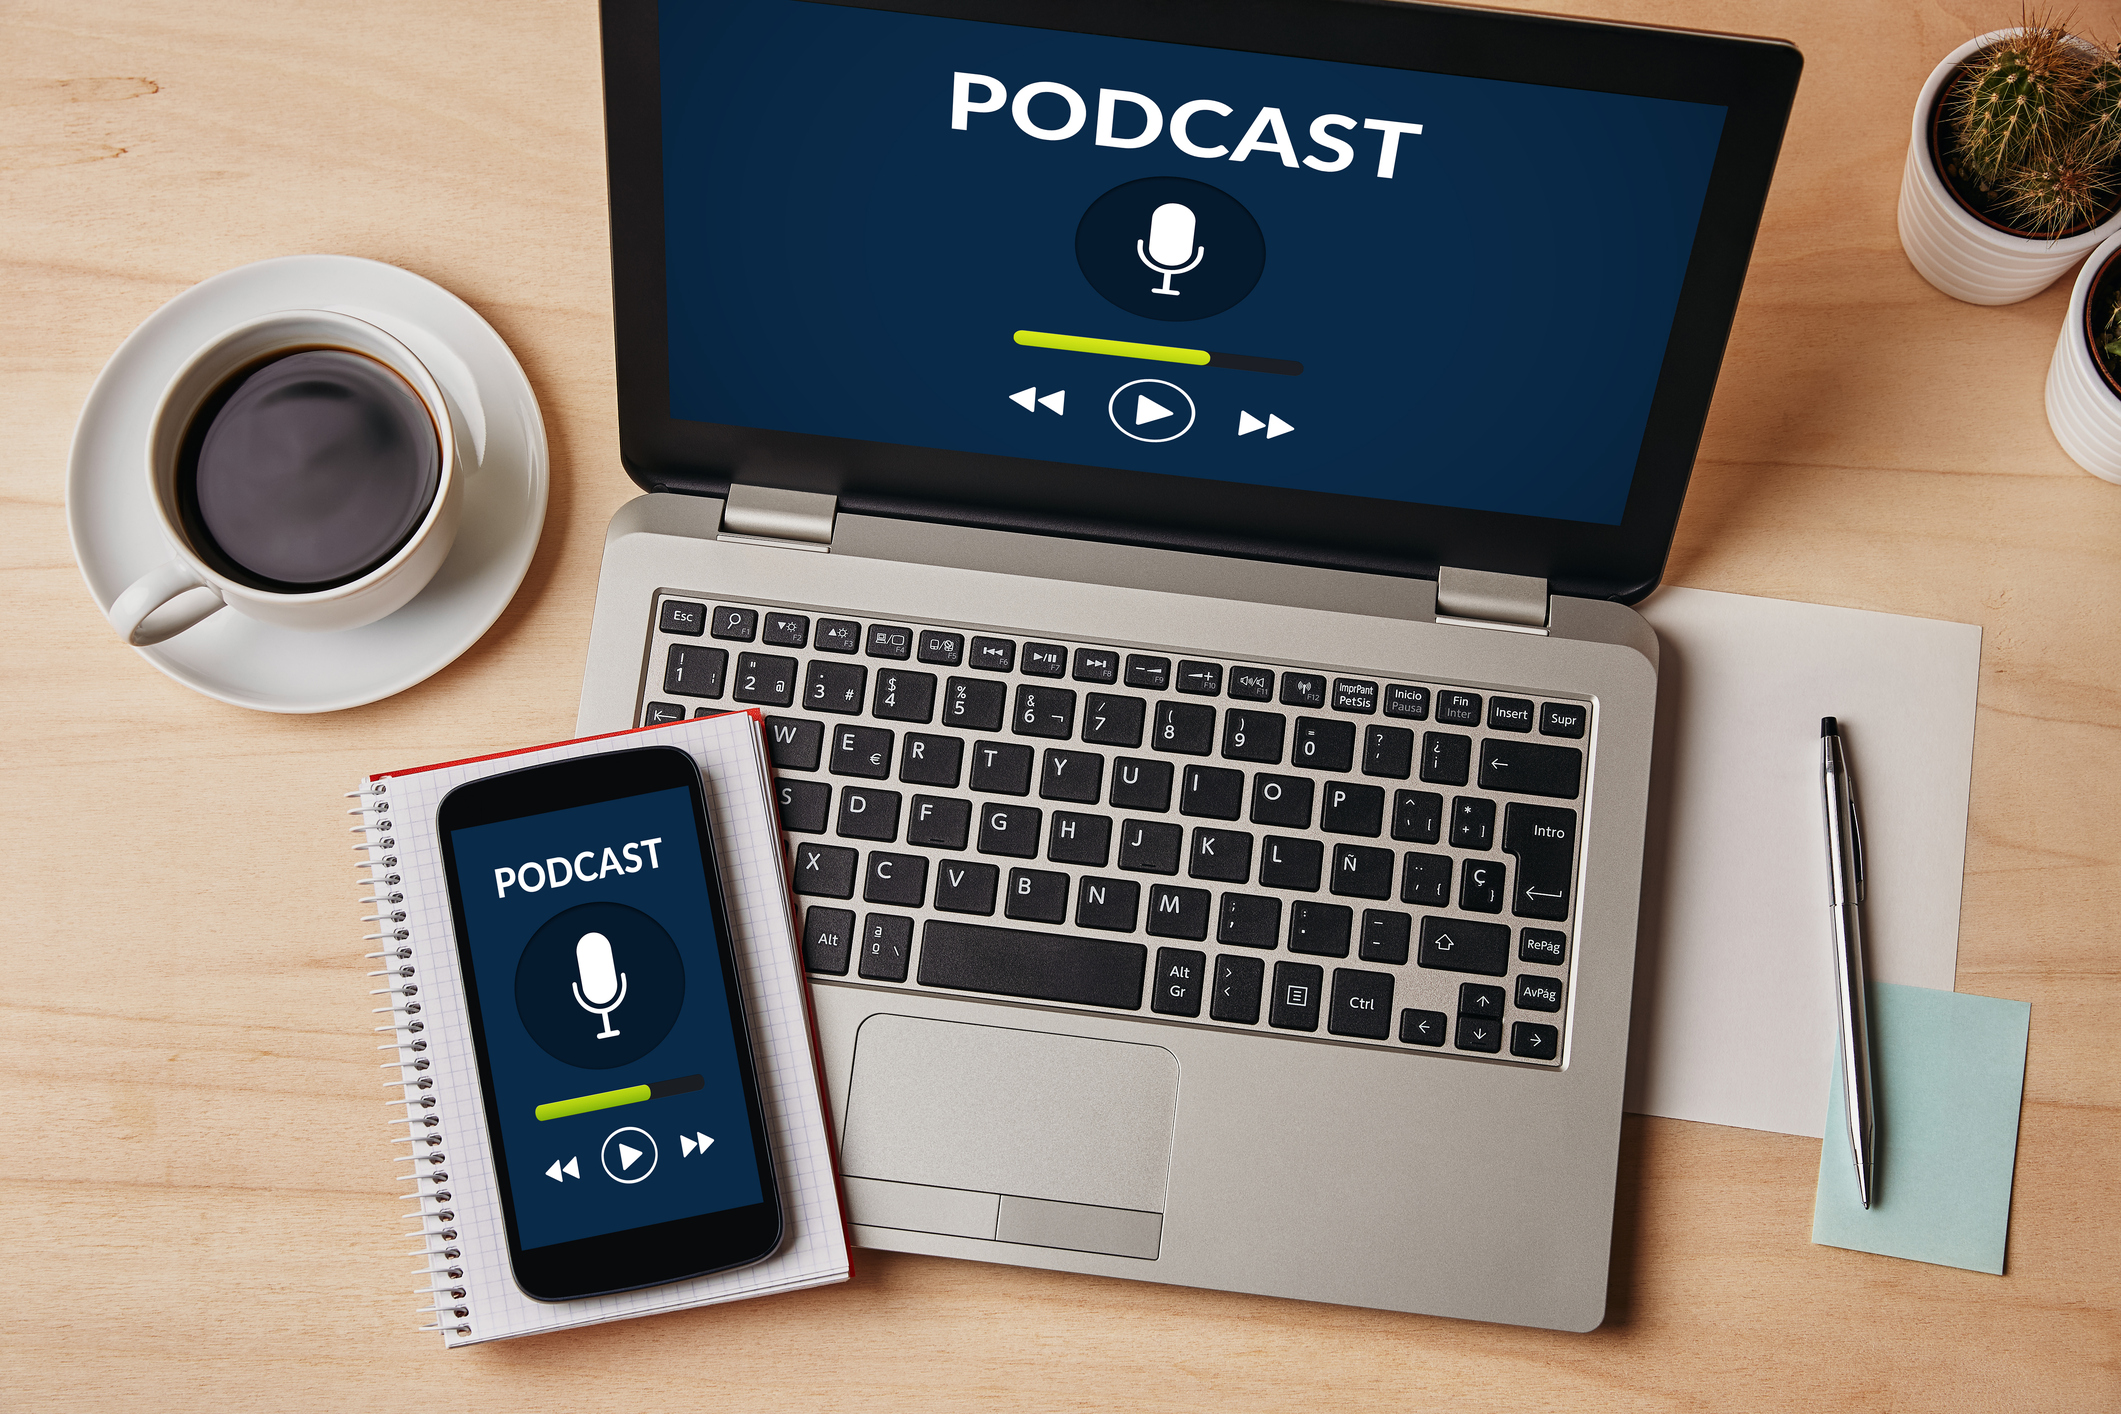 Podcast imagery is displayed on an open laptop and smartphone laying on a desk in a work environment.